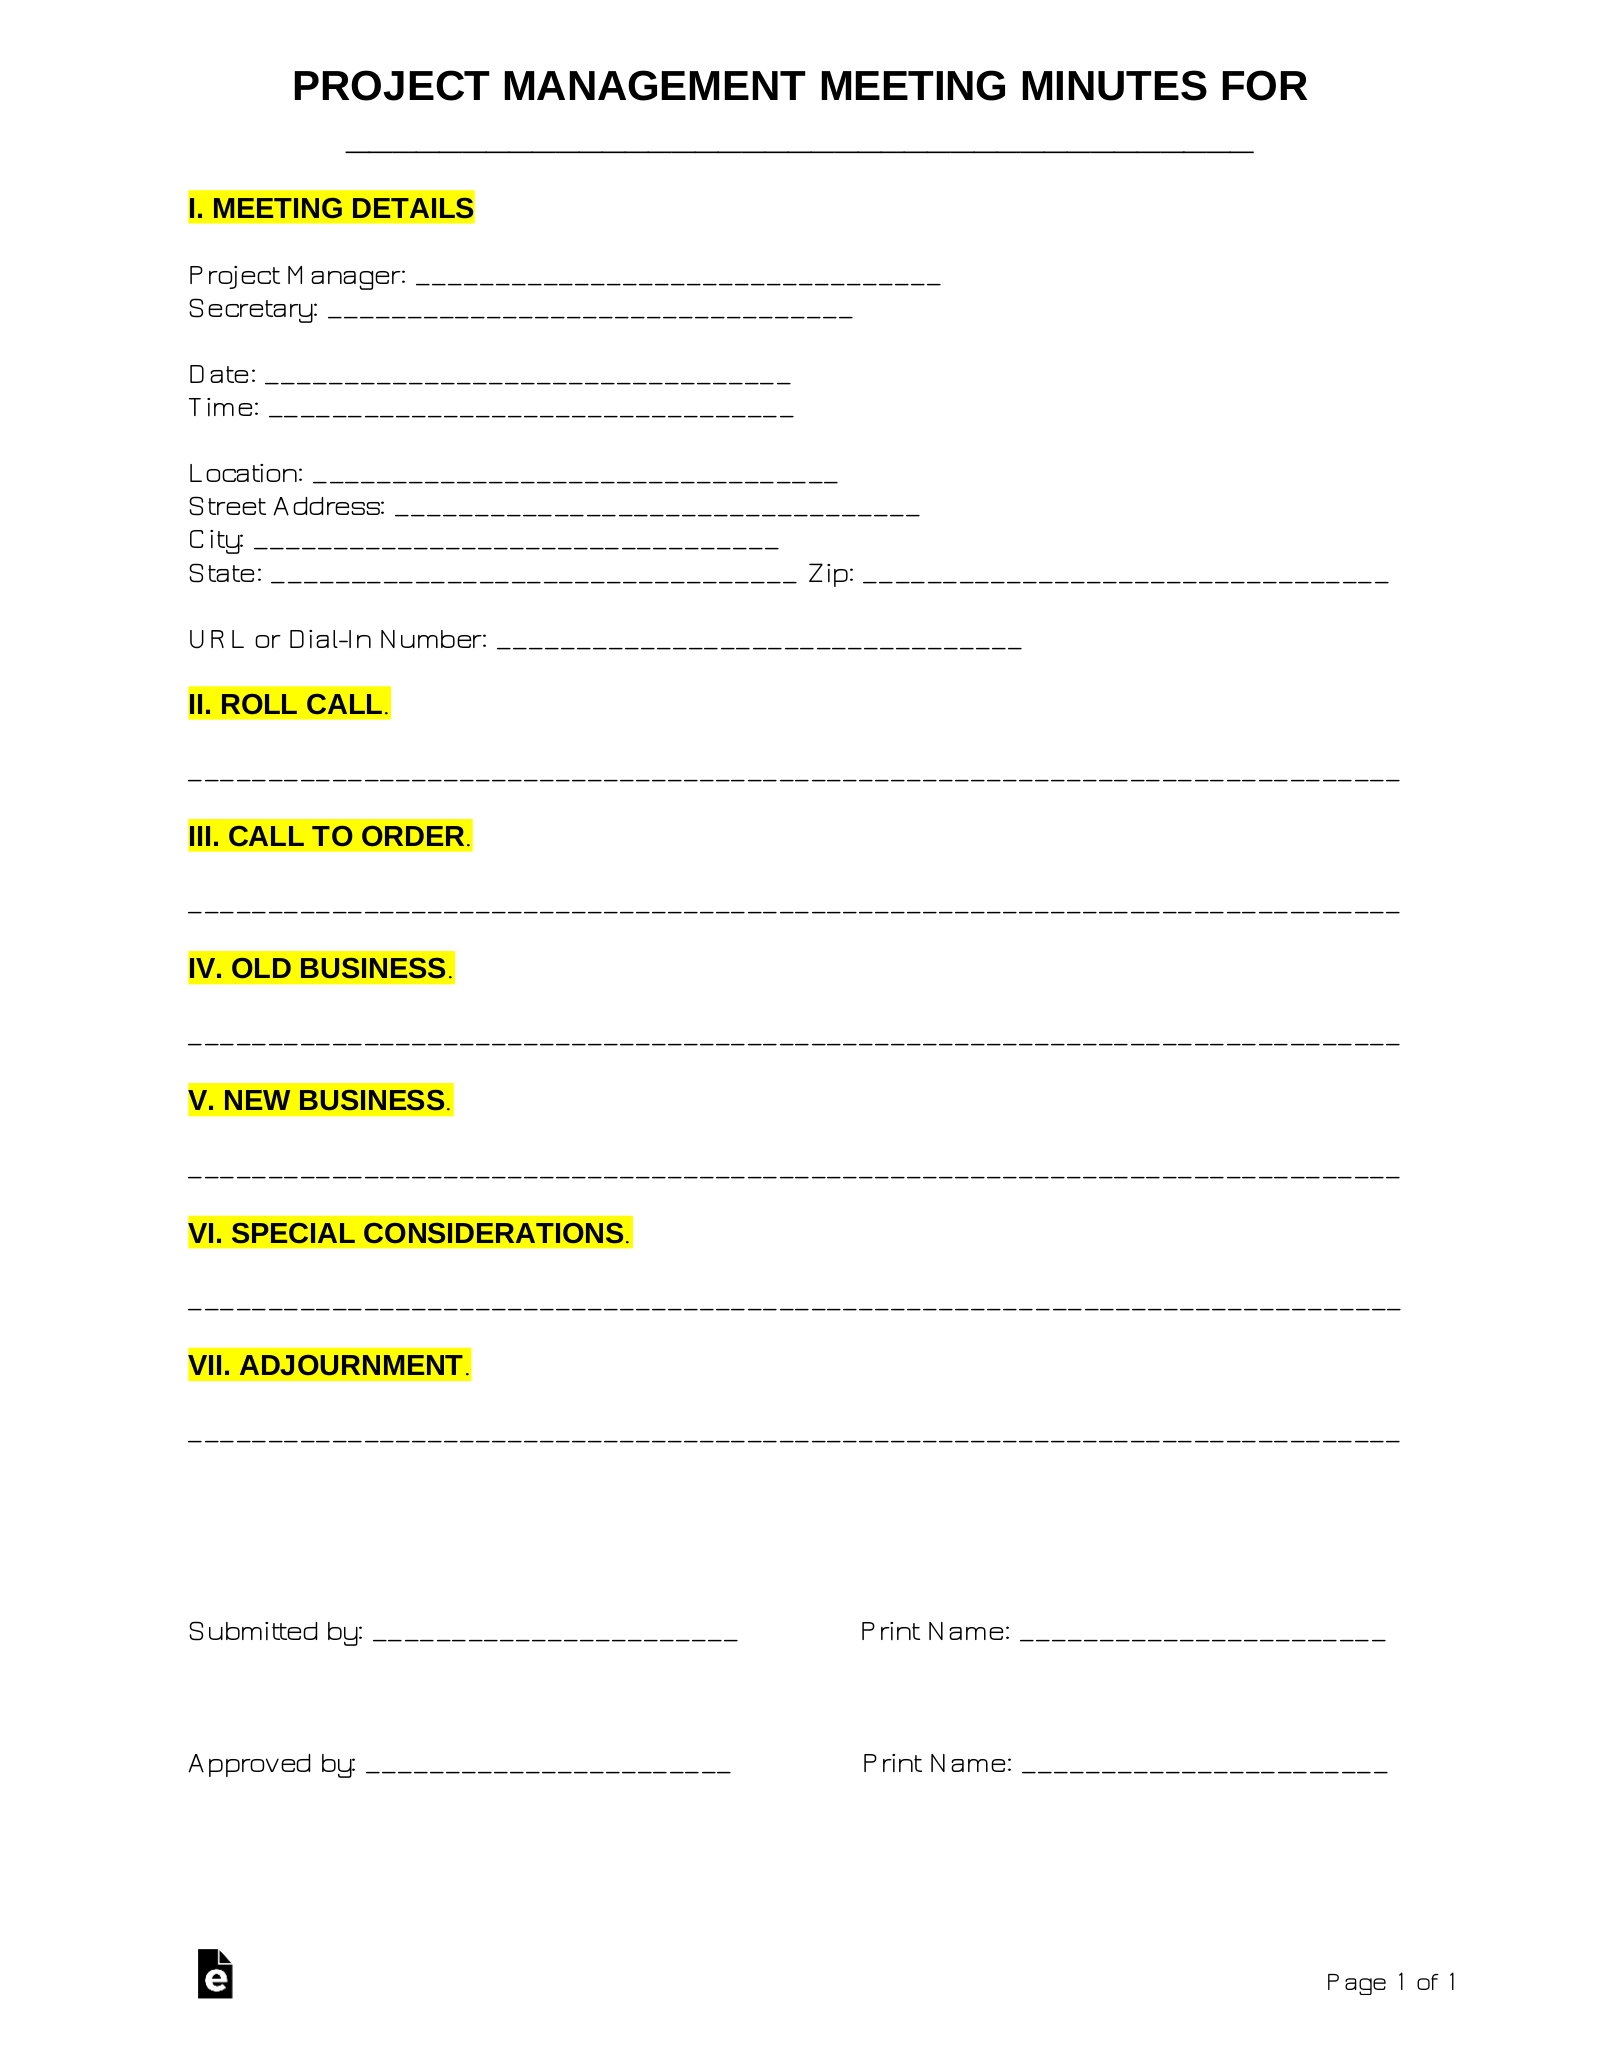 Project Management Meeting Minutes Template | Sample